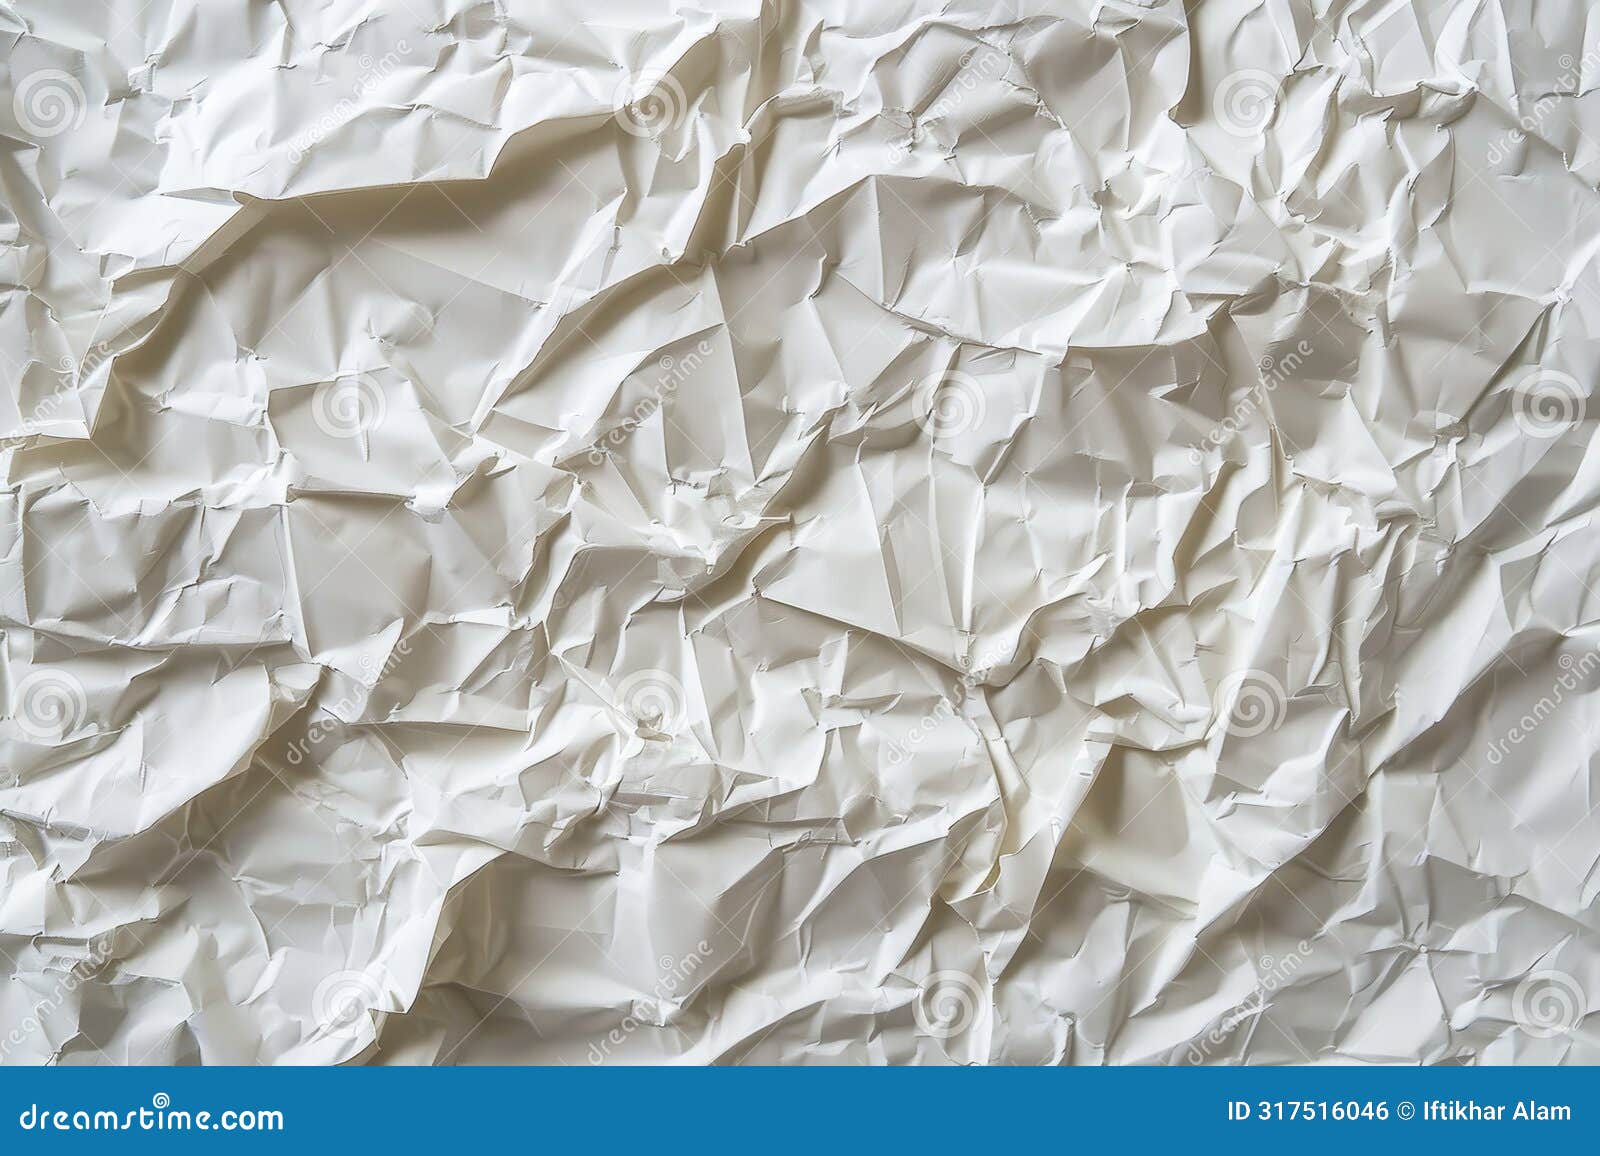 detailed view of a white paper with deep wrinkles and creases, close-up shot, a crumpled paper texture with deep wrinkles and